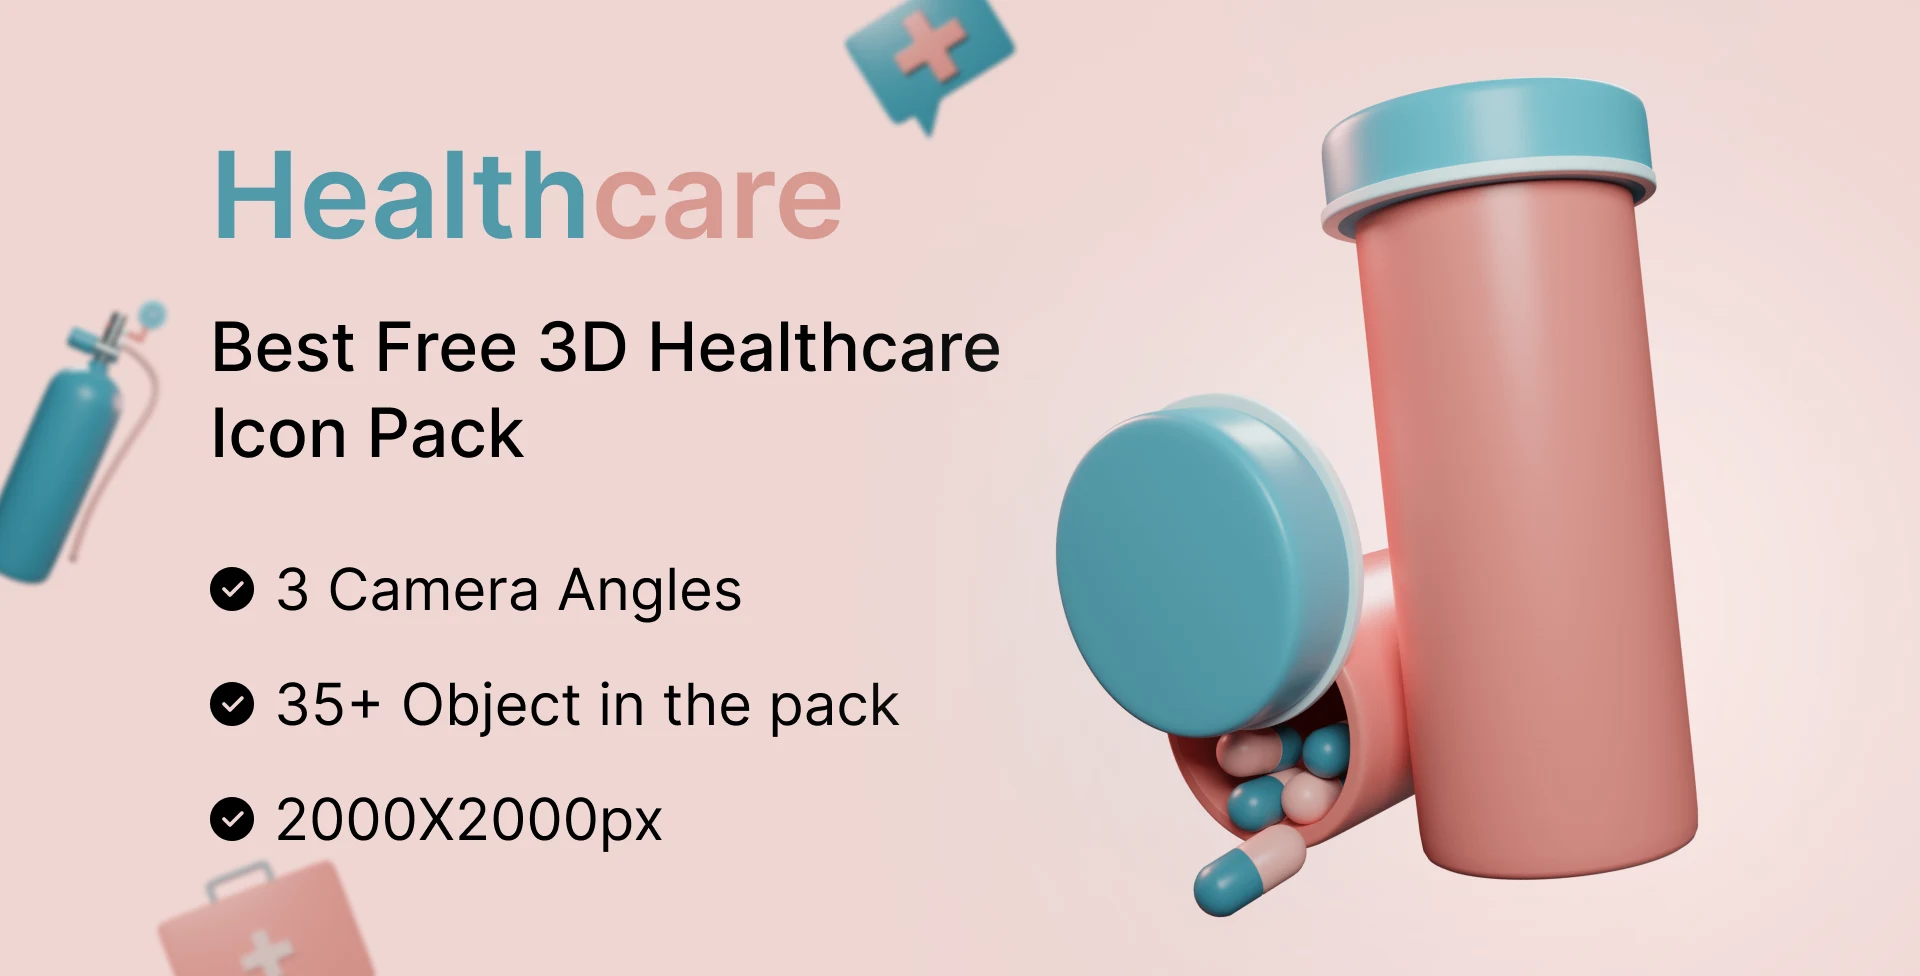 Best Free 3D Healthcare Icon Pack | Healthcare | Iqonic Design Free Design Resources for UIUX Free Design Resources for UIUX Small preview 4